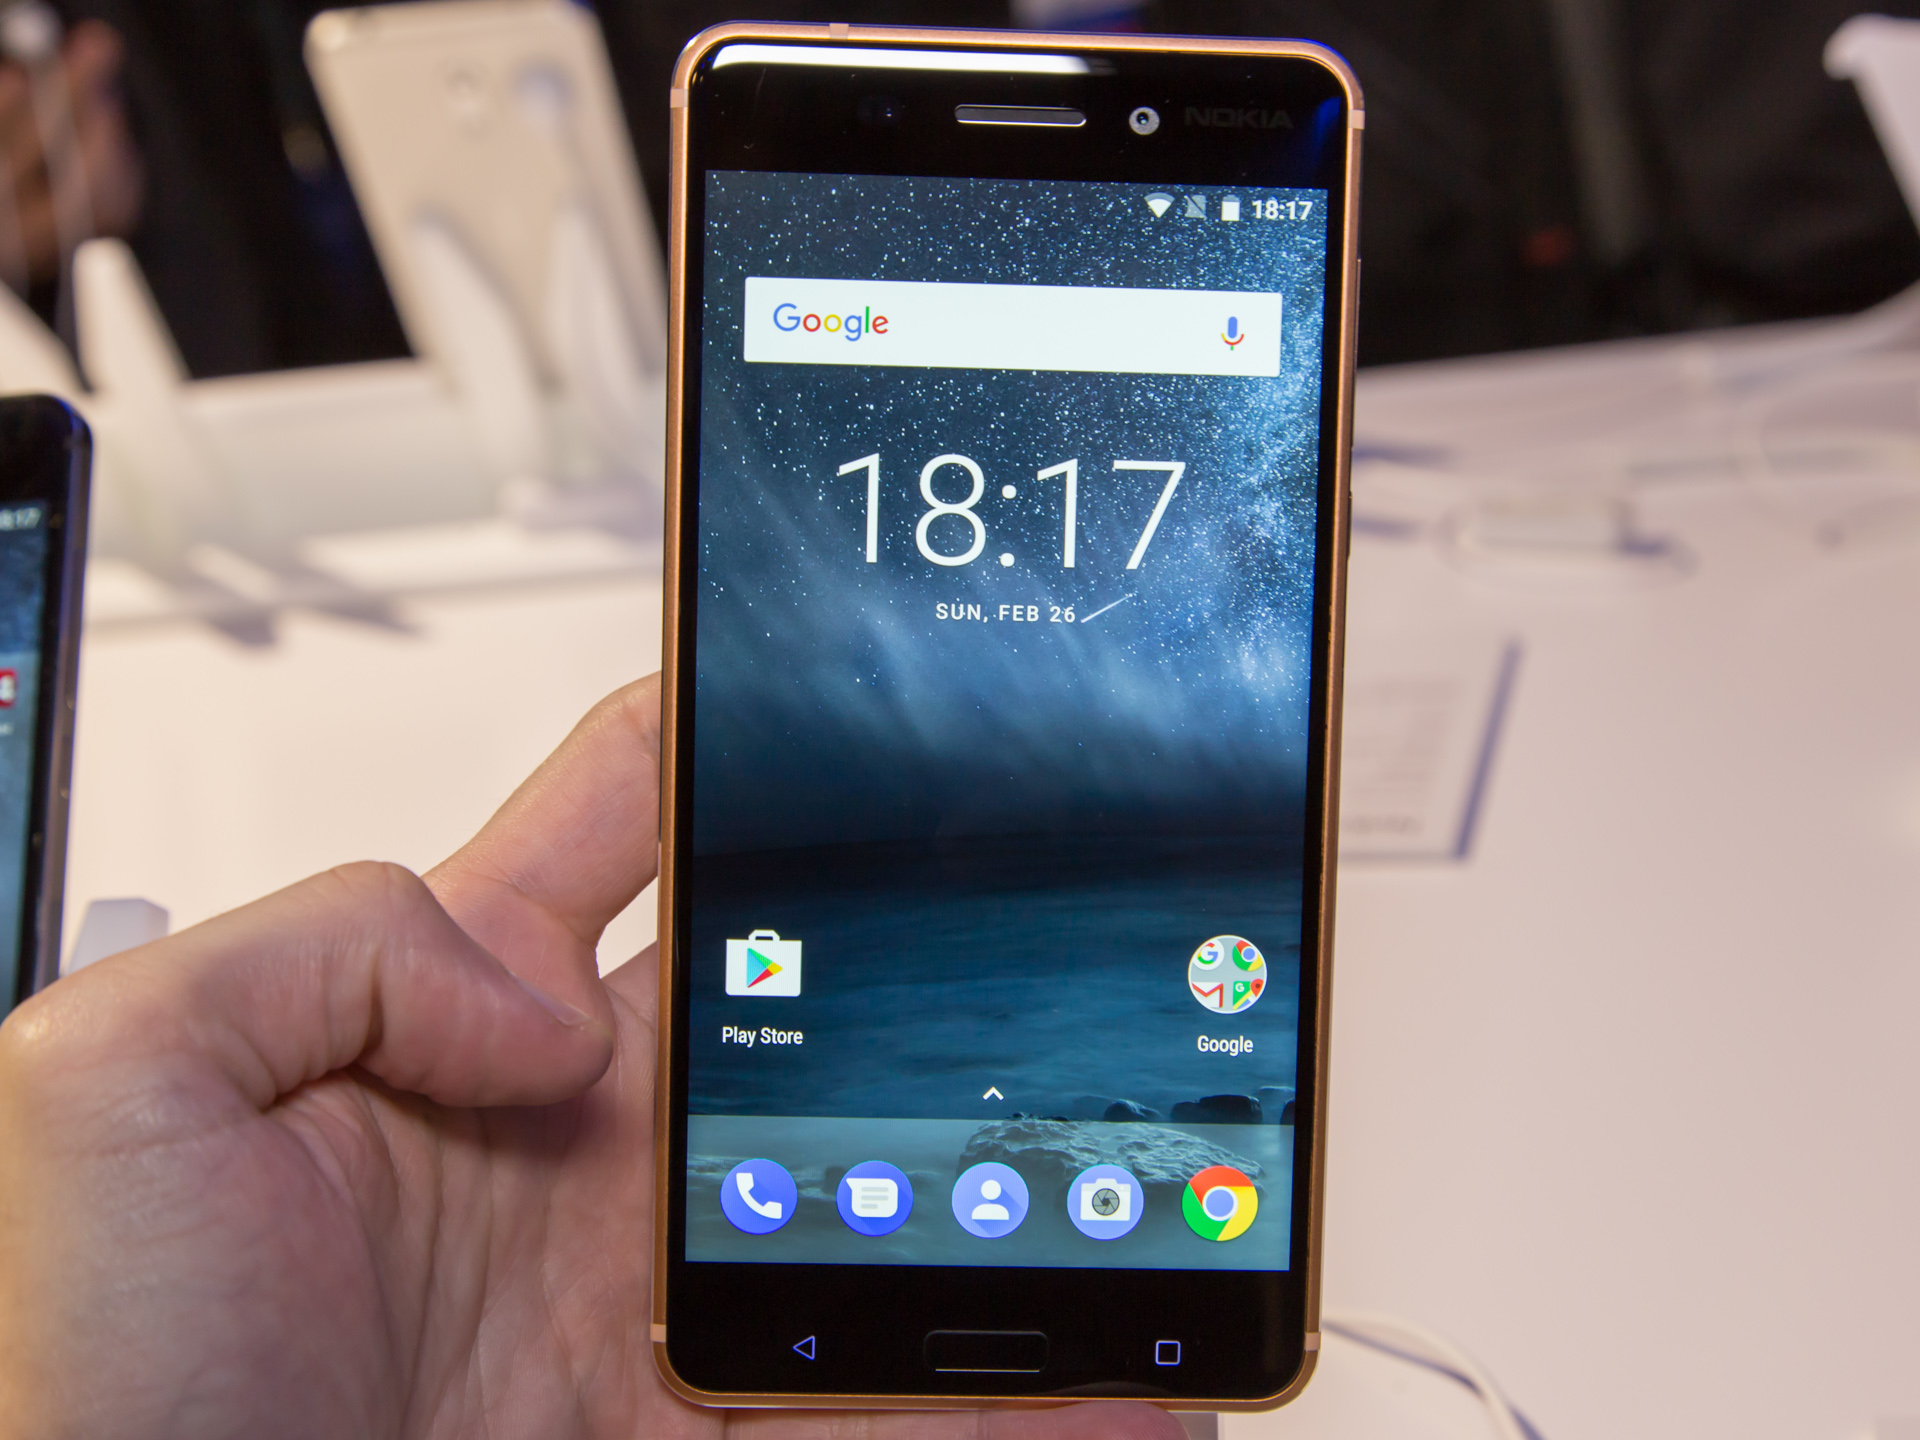 Nokia 6 Smartphone, Screen Size: 5.5 Inch at Rs 15999/piece in